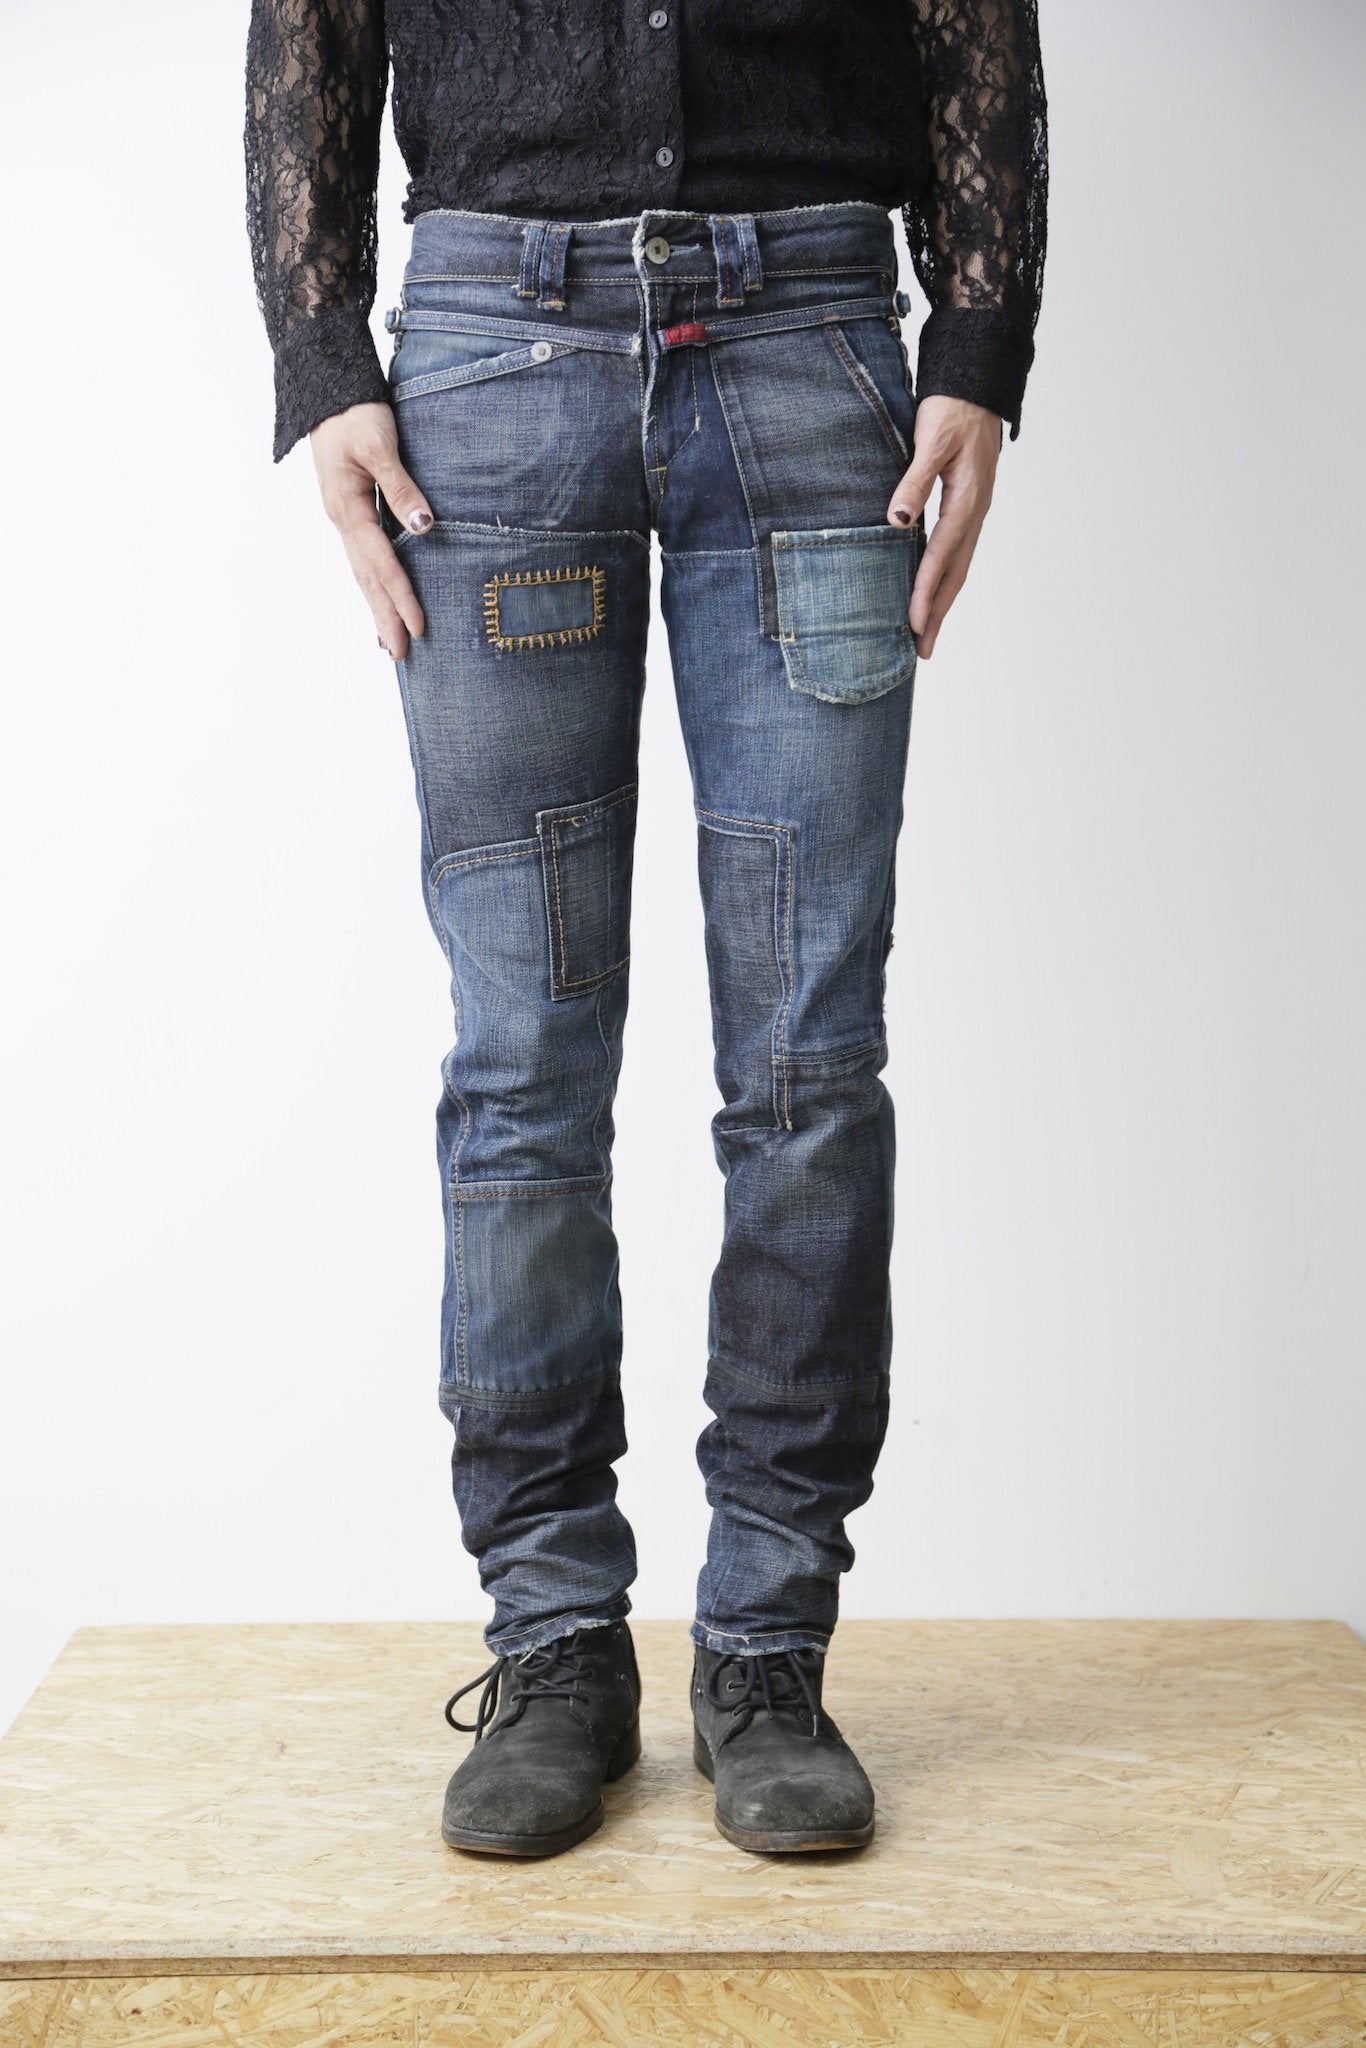 MARITHE + FRANCOIS GIRBAUD CRAFT TIGHT JEANS